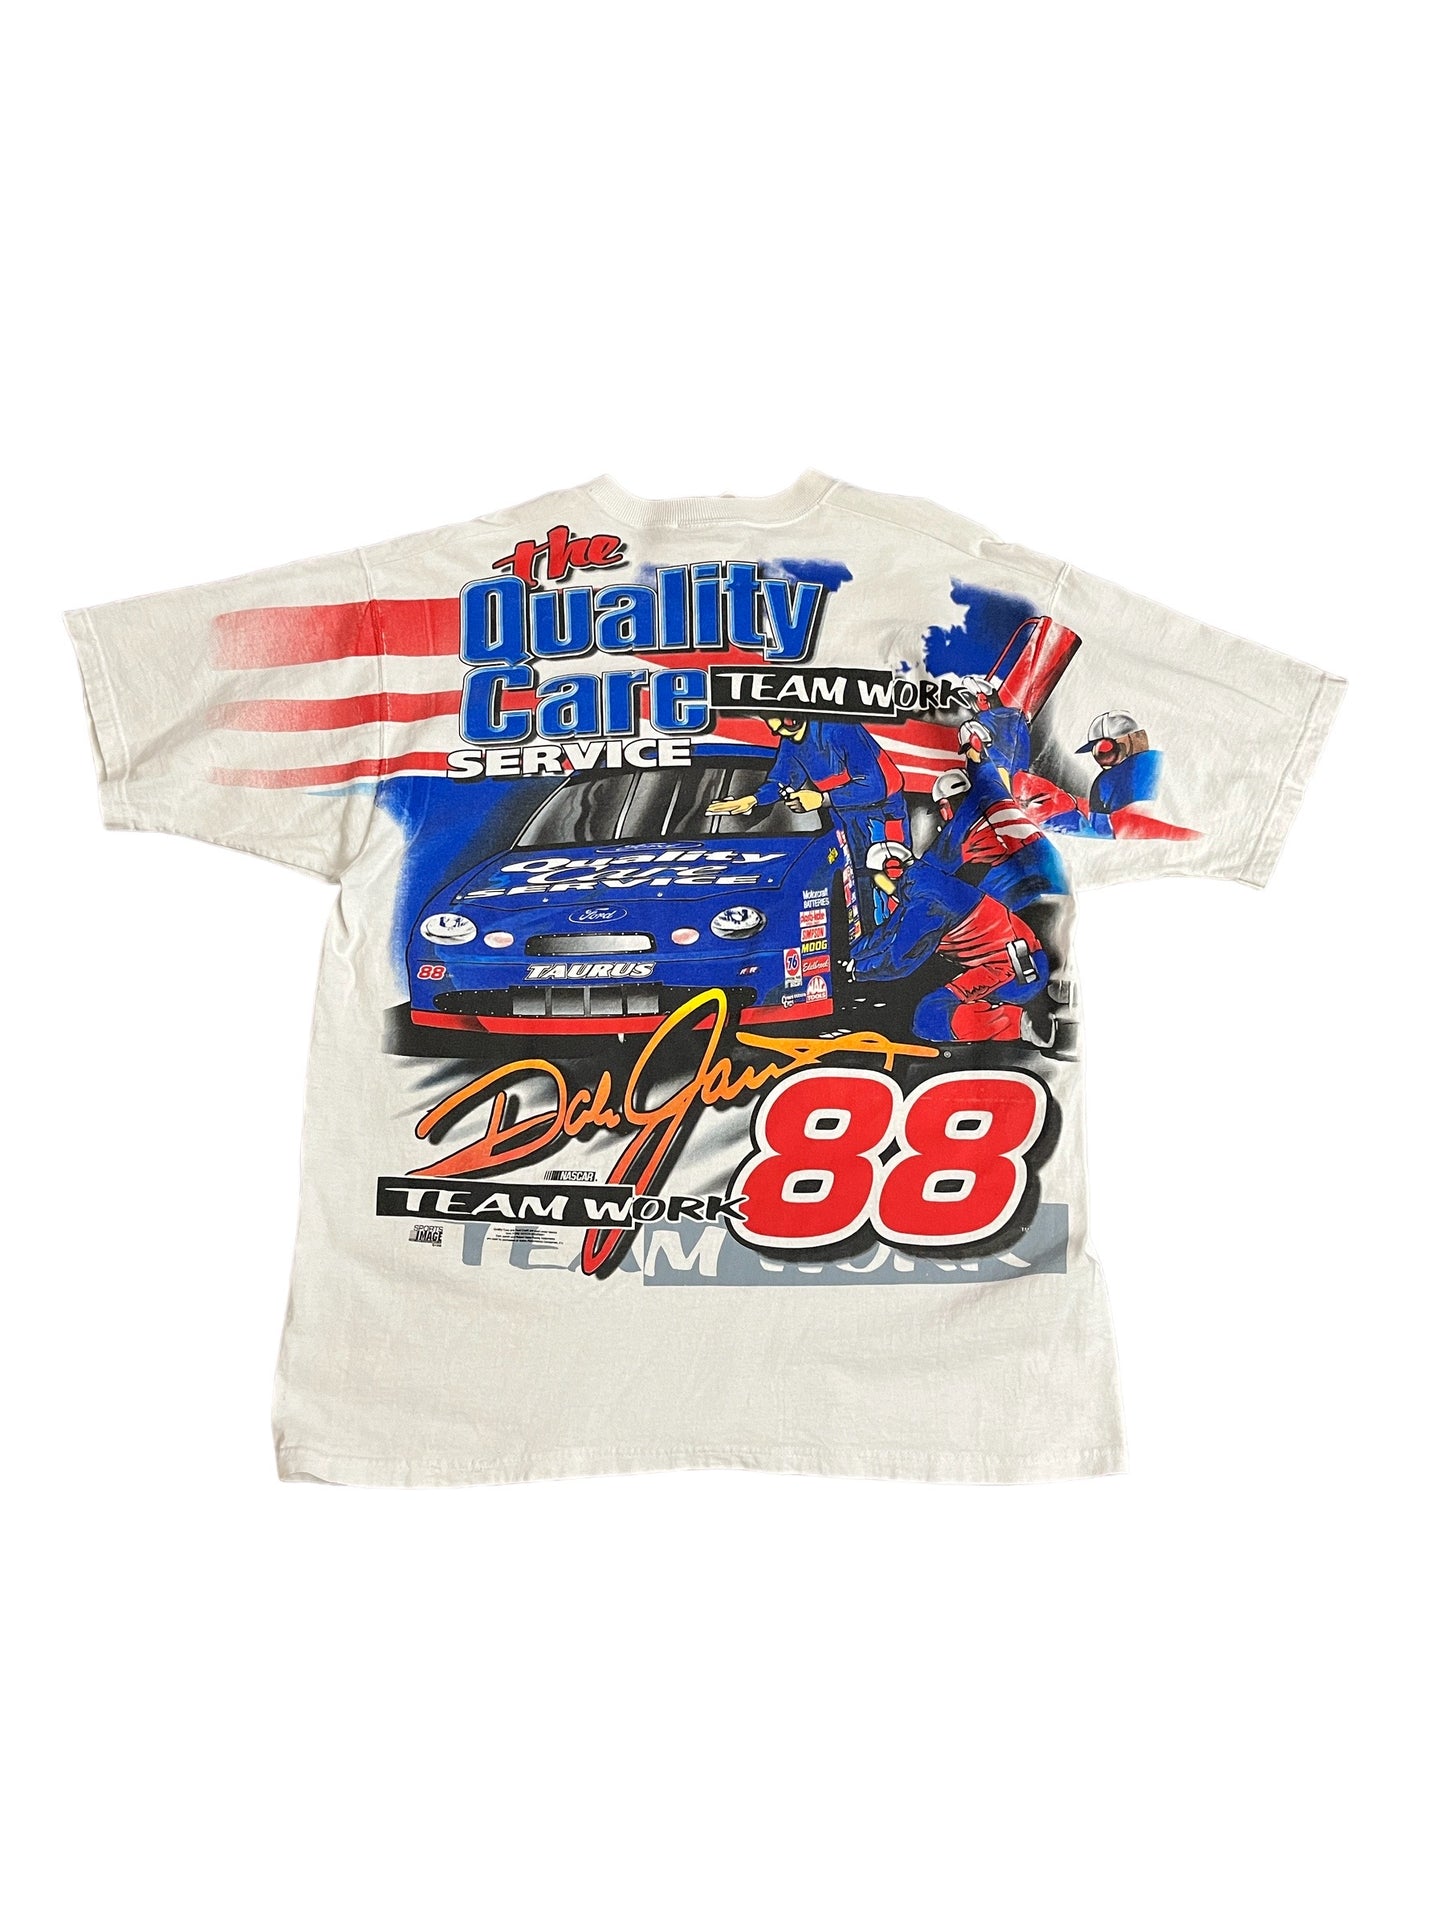 Vintage Nascar The Drive For Excellence "Robert Yates" AOP Tee